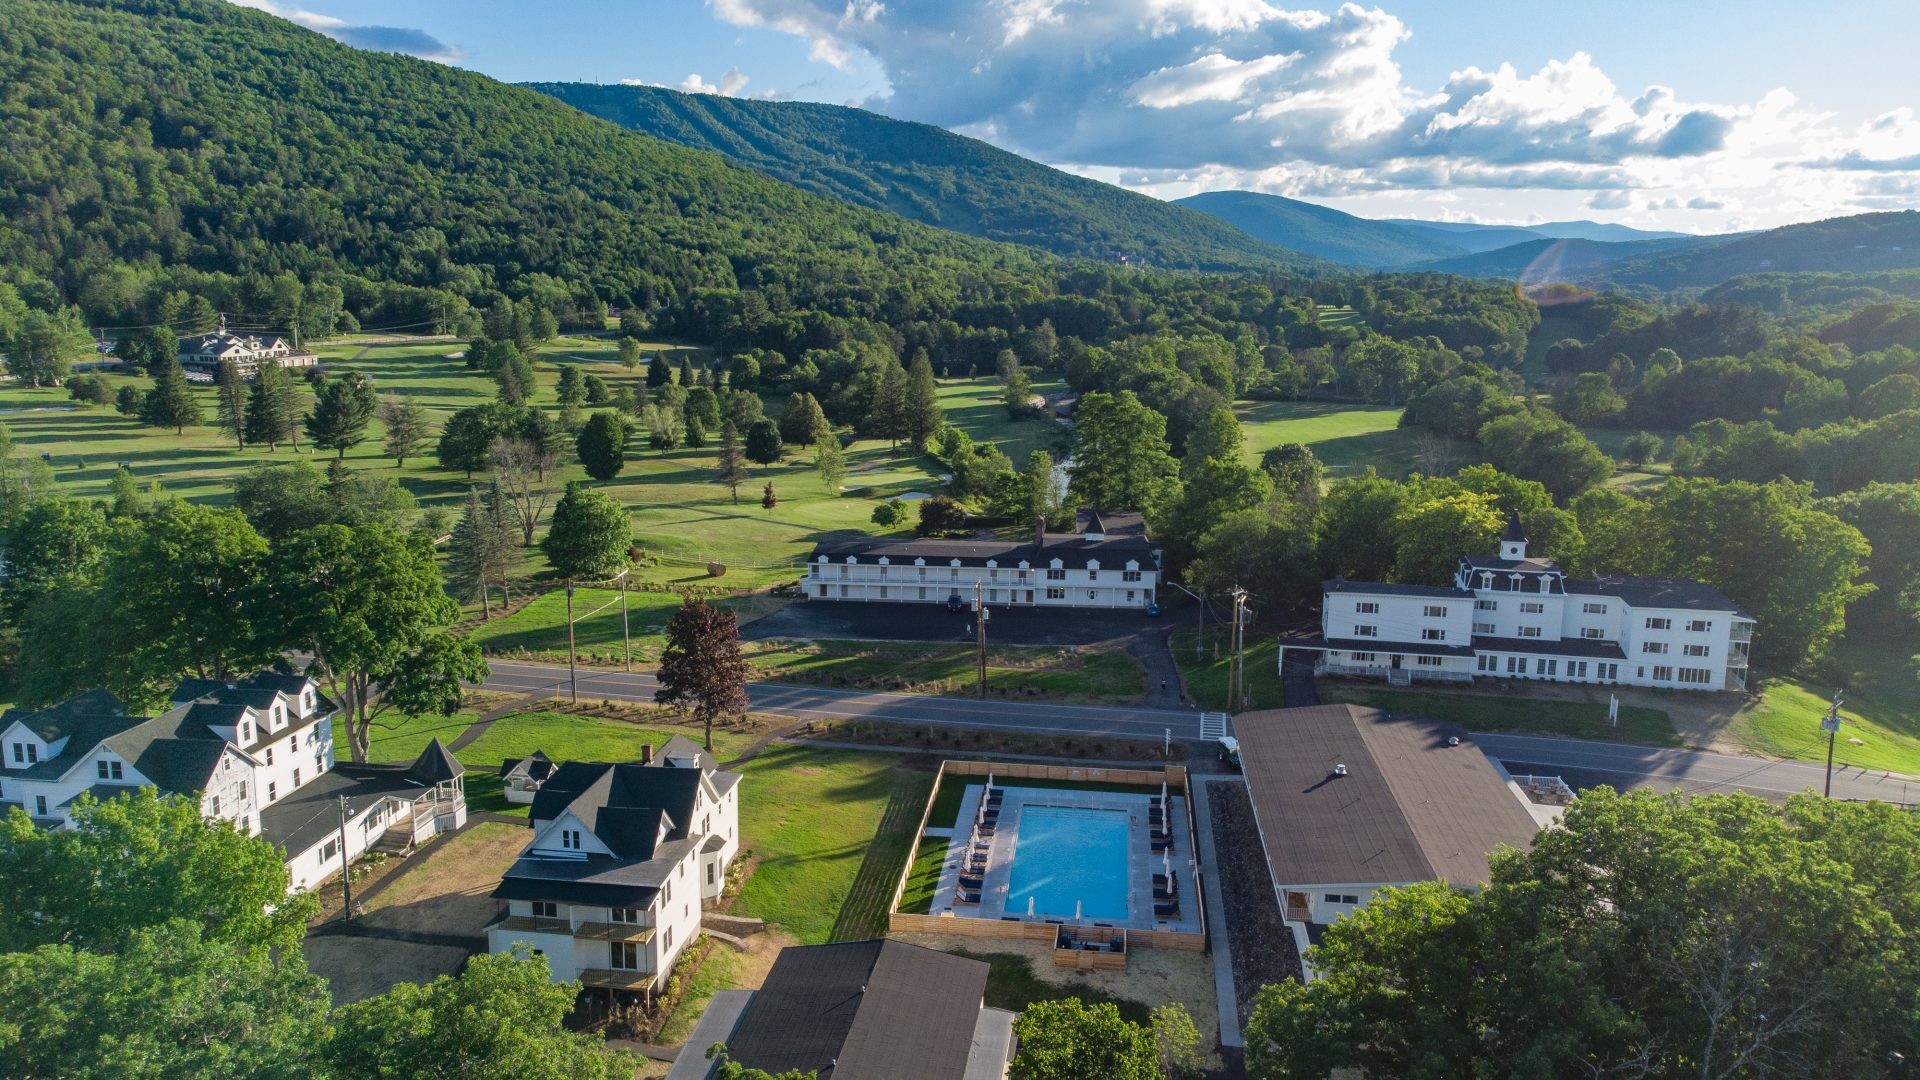 Dji 0124 1 Why The Wylder Windham Hotel Should Be On Your Upstate